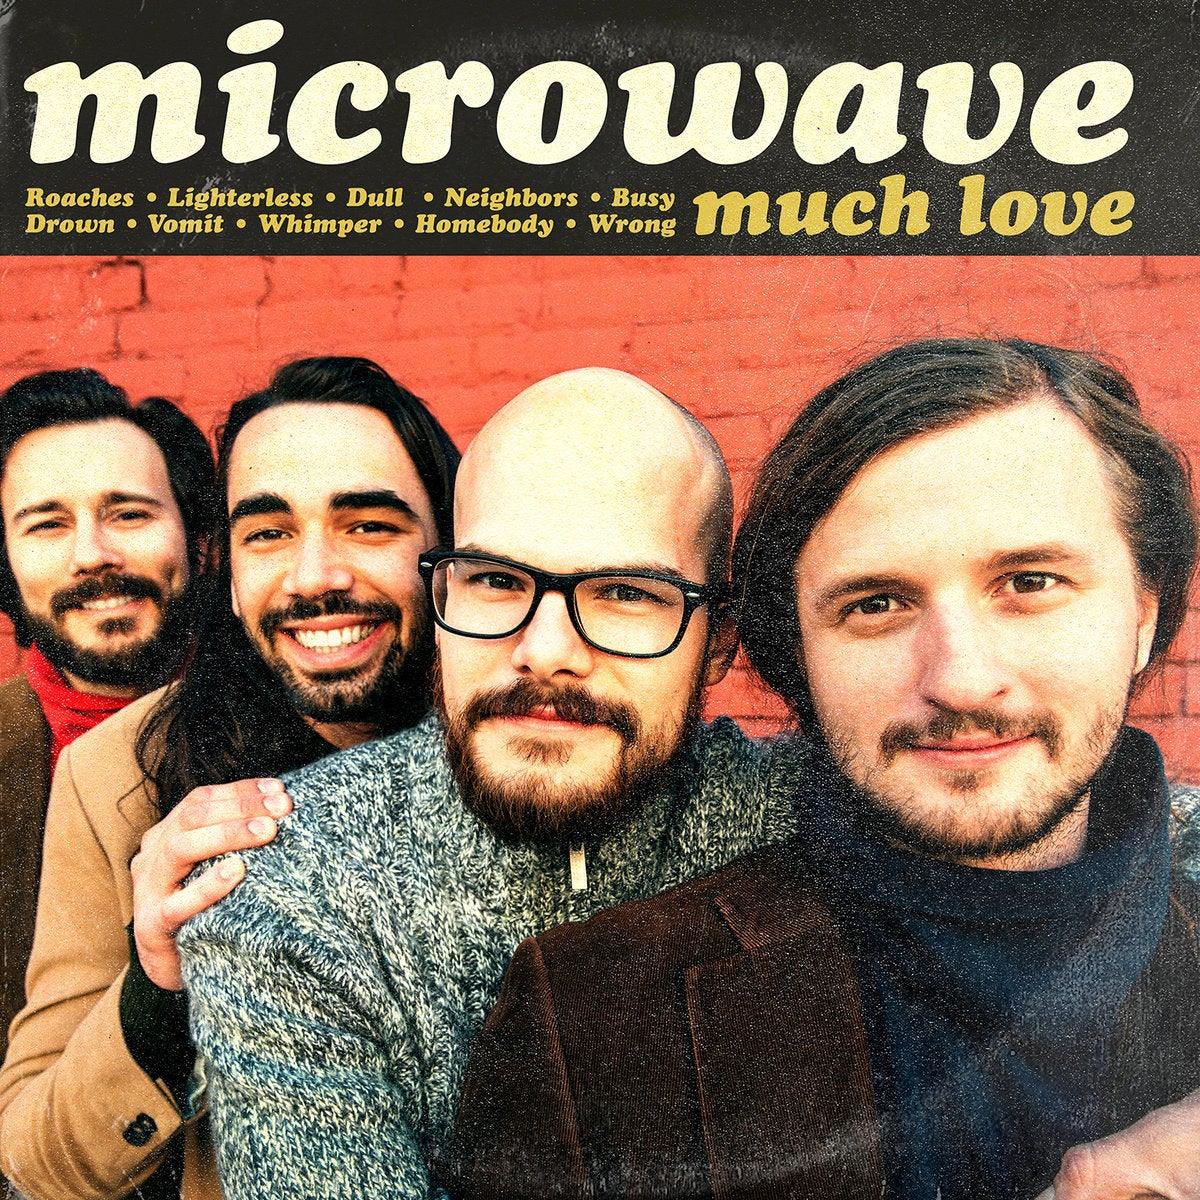 Buy – Microwave "Much Love" CD – Band & Music Merch – Cold Cuts Merch